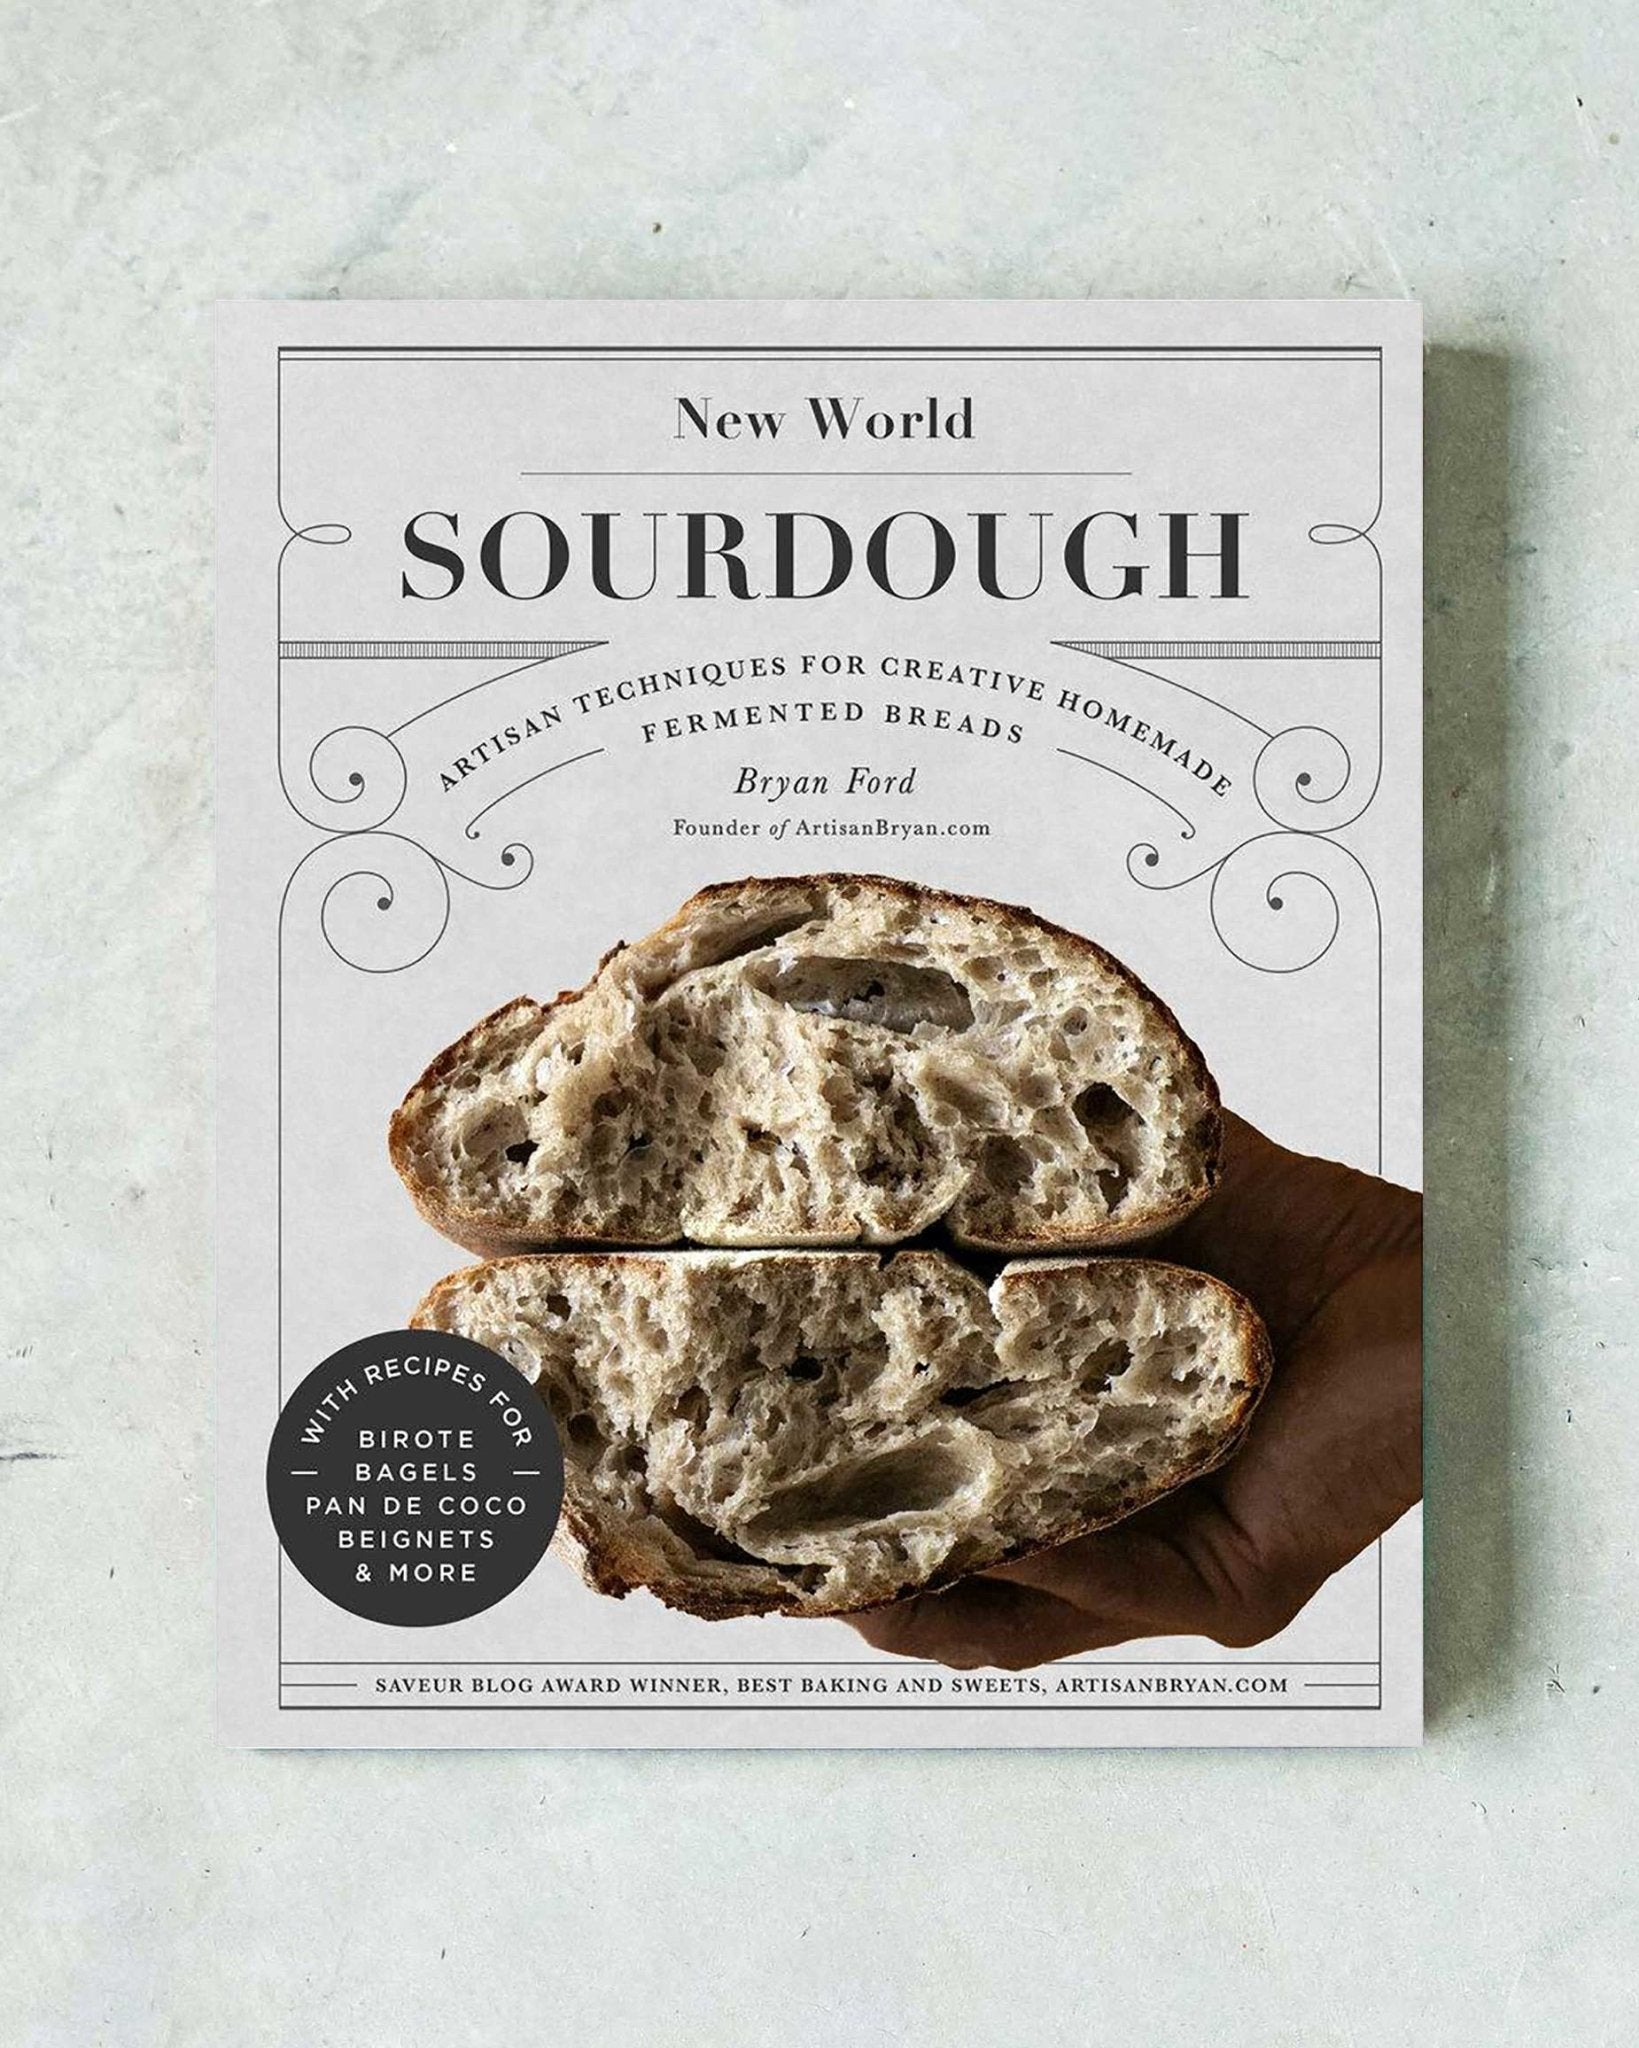 Sourdough Bread 101: Learn the Essentials for Making Sourdough Bread @ Home  Tickets, Wed, Jan 17, 2024 at 4:30 PM